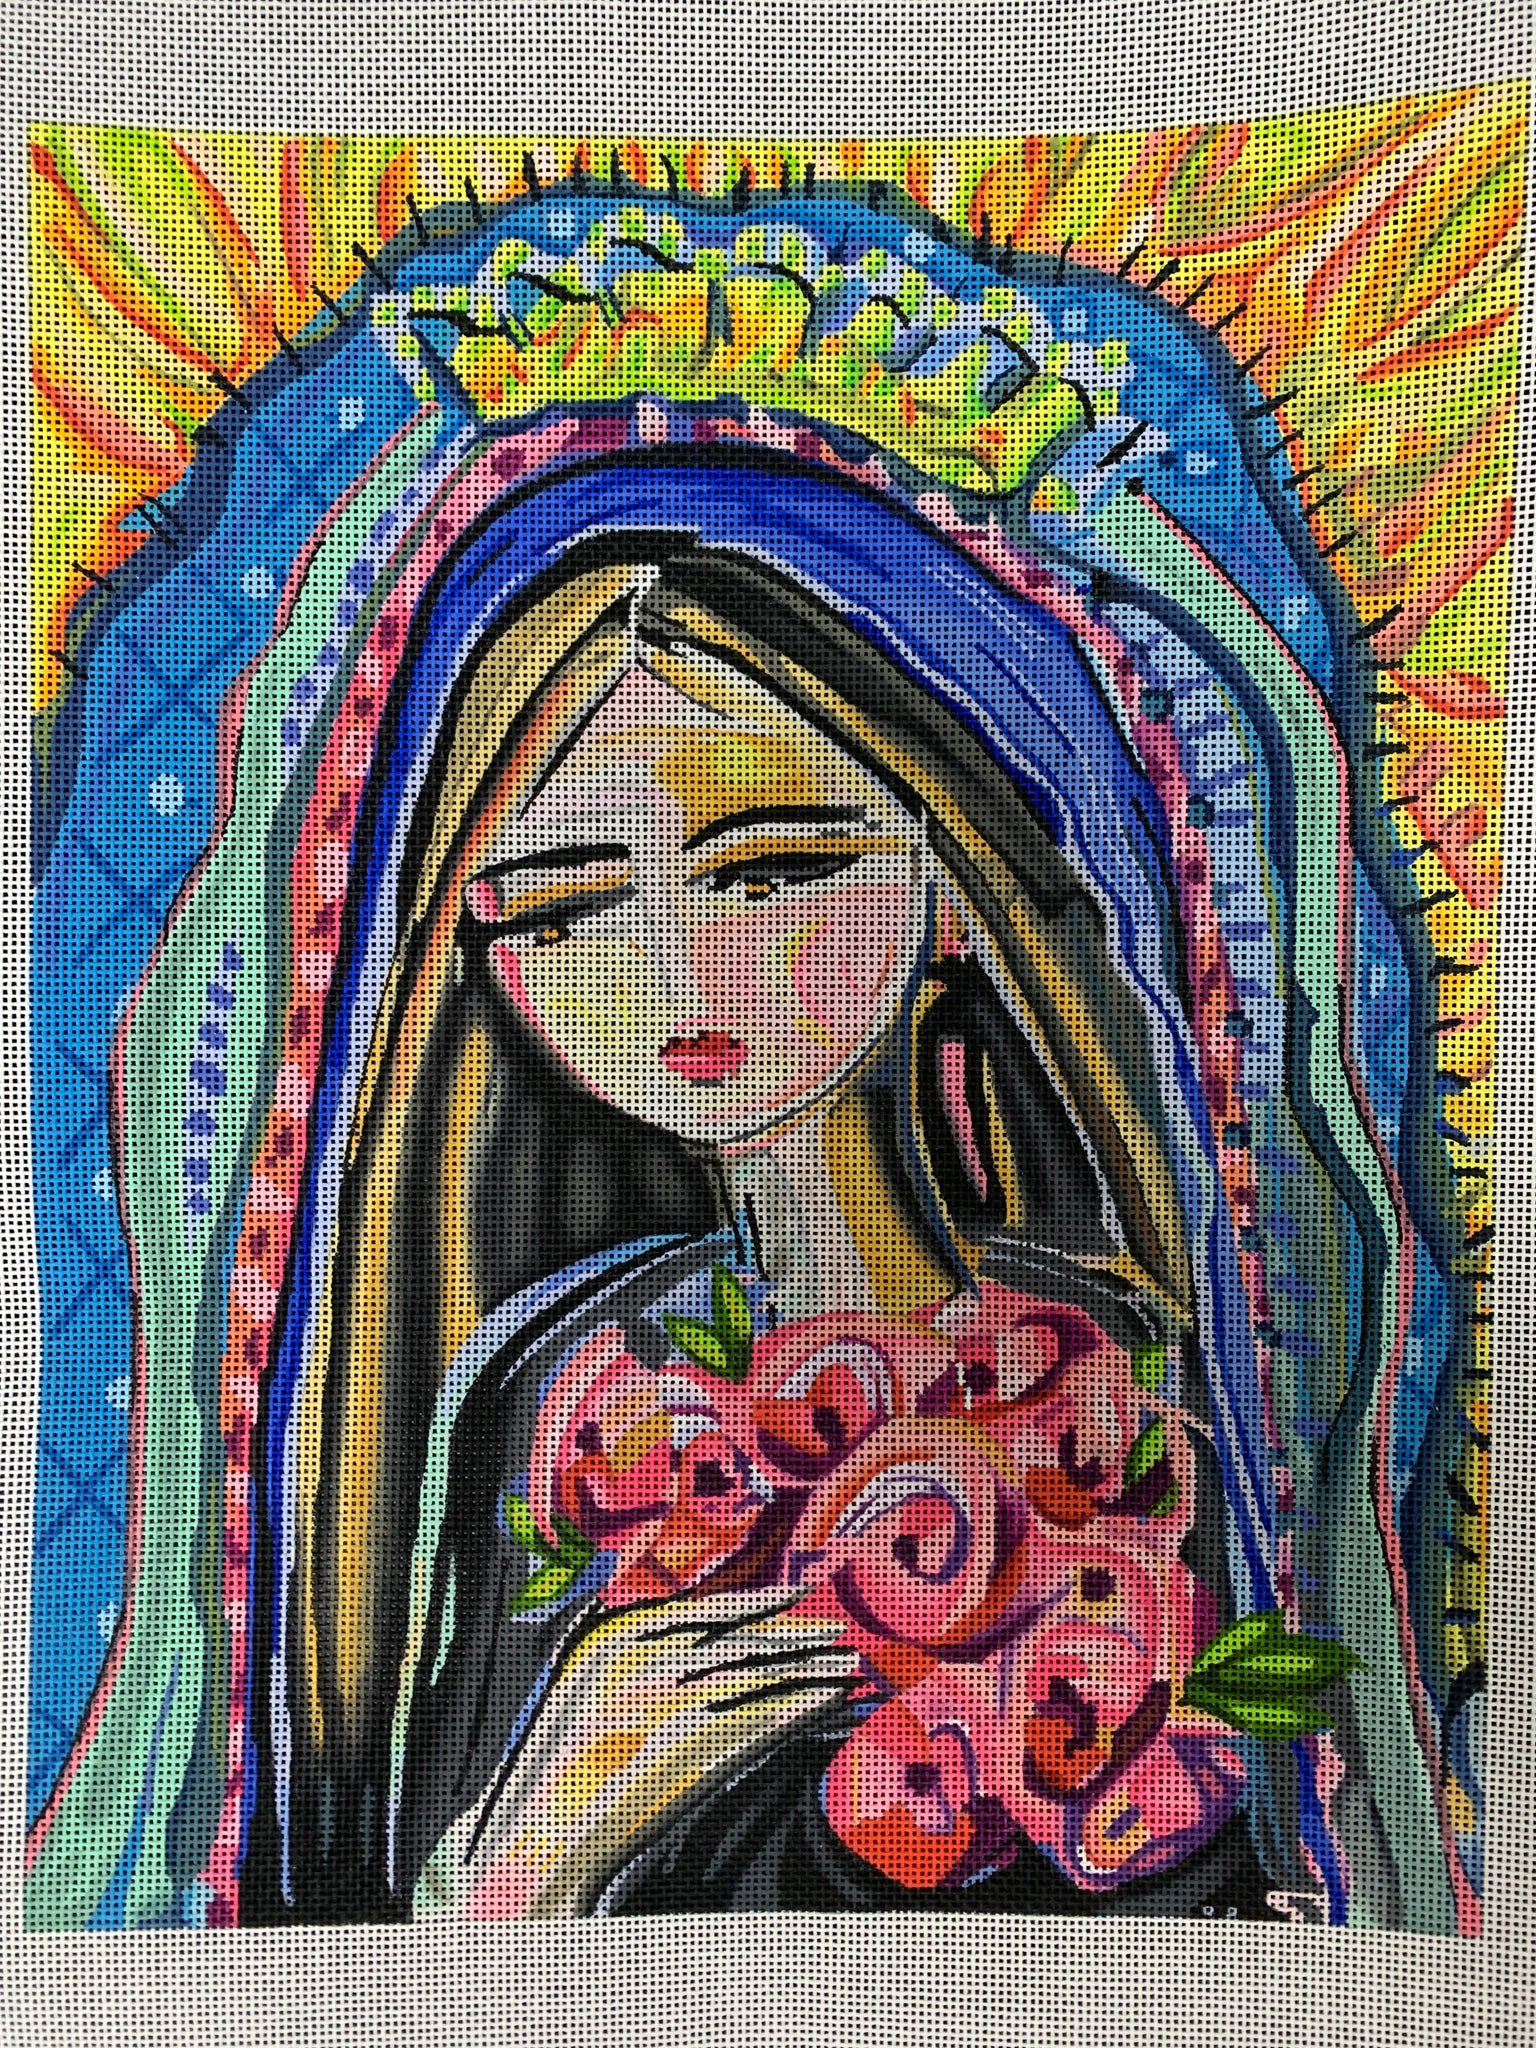 Maren Devine - Our Lady of Guadaloupe with castilian roses